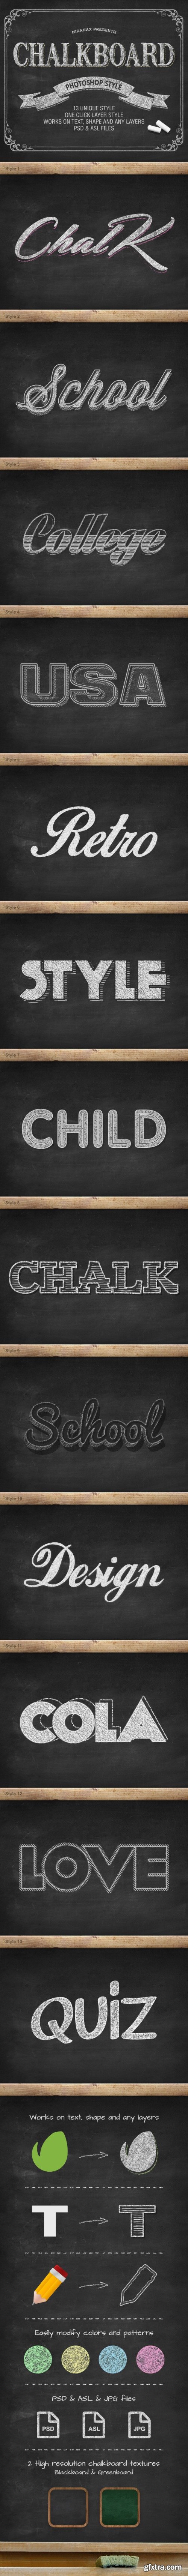 Graphicriver - Chalkboard Photoshop PSD Layer Styles 7631766